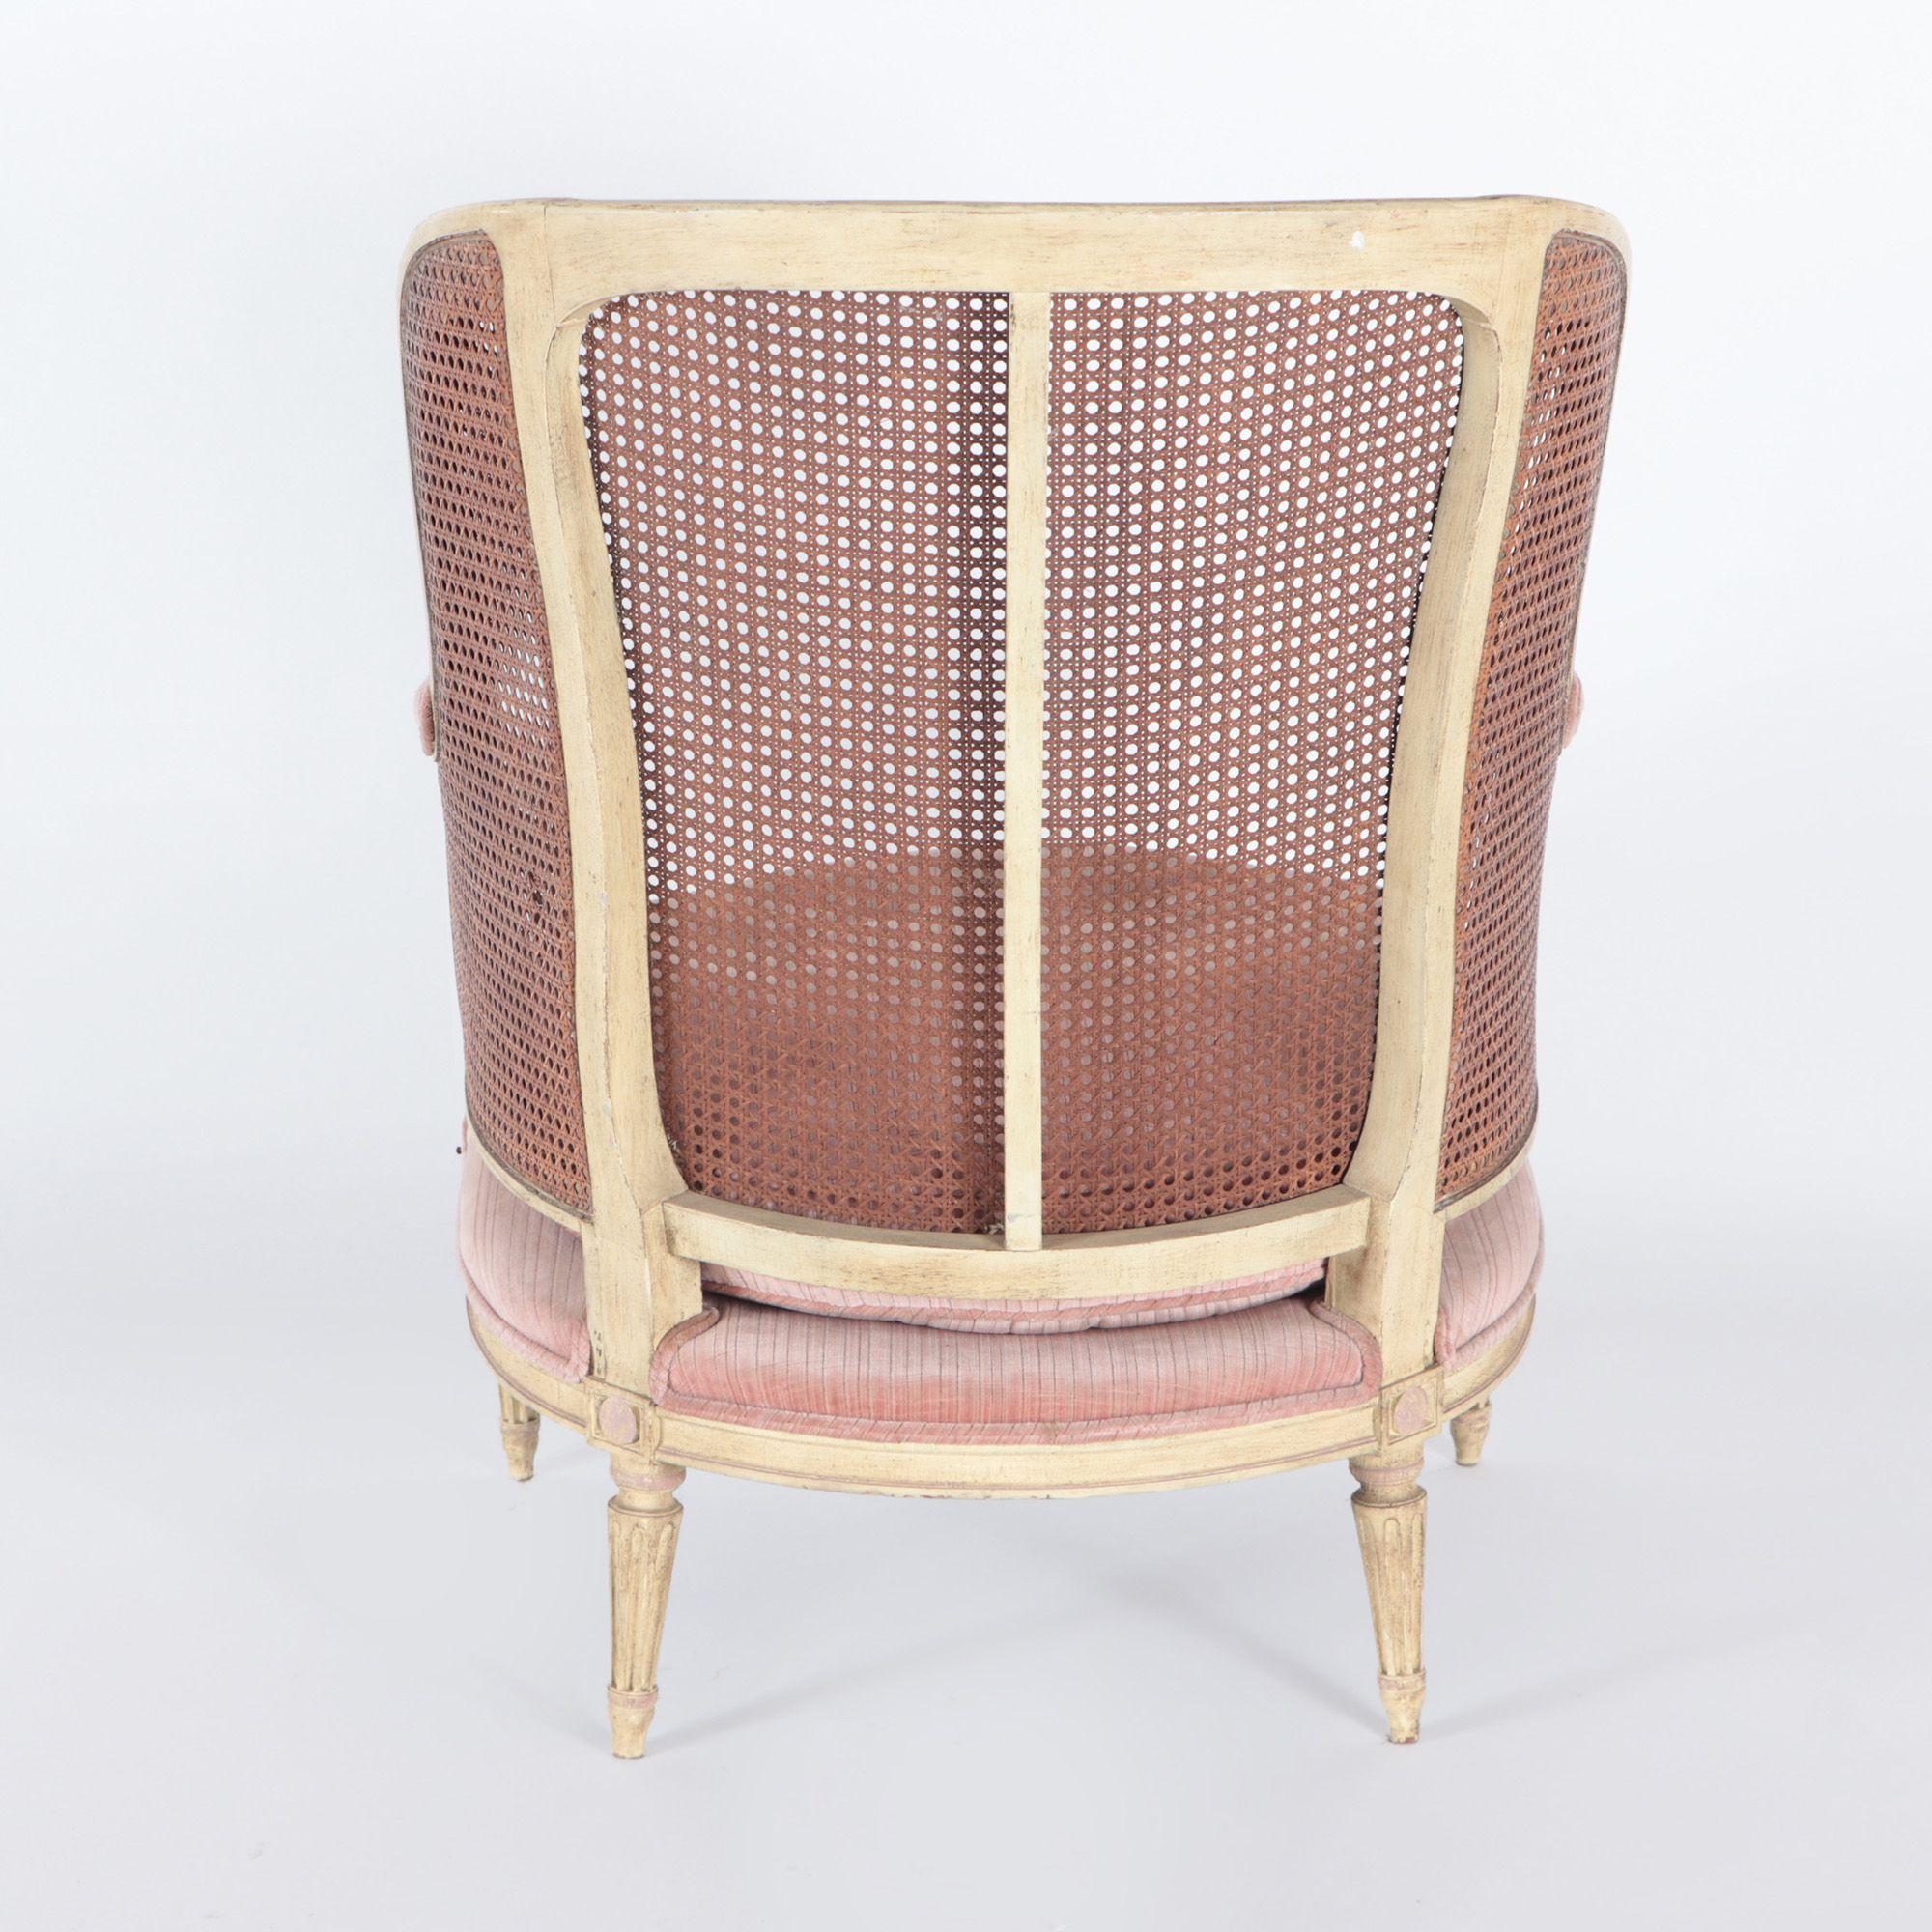 Late 19th Century French Directoire Style Painted and Cain Bergere Chair with Conforming Ottoman